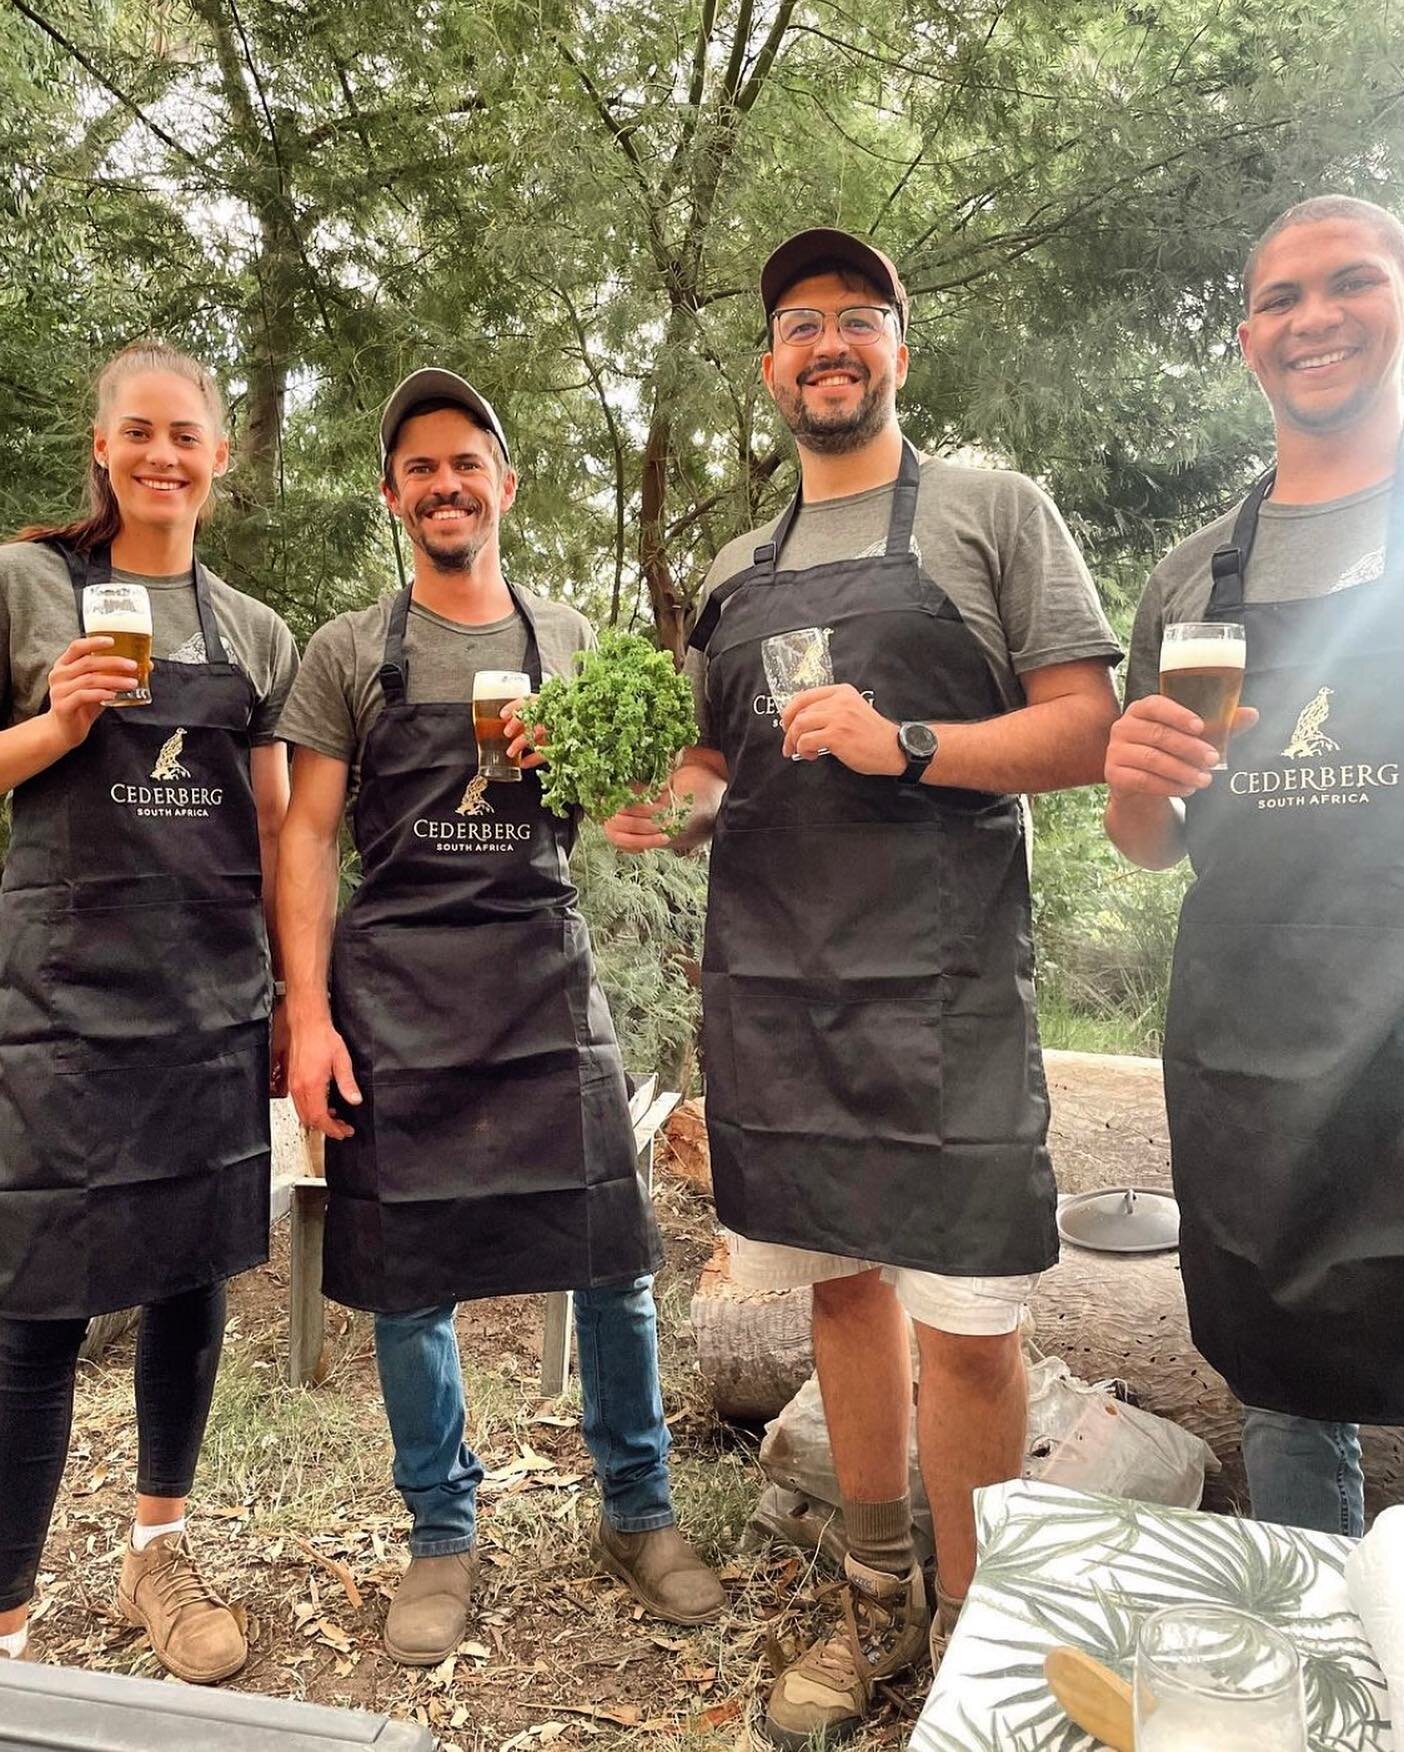 Our team is always up for a challenge, especially if it involves having fun! 🎉  We take pride in our passion for crafting exceptional brews and creating unforgettable experiences for #Cederbrew enthusiasts! Whether it's competing to make the best po